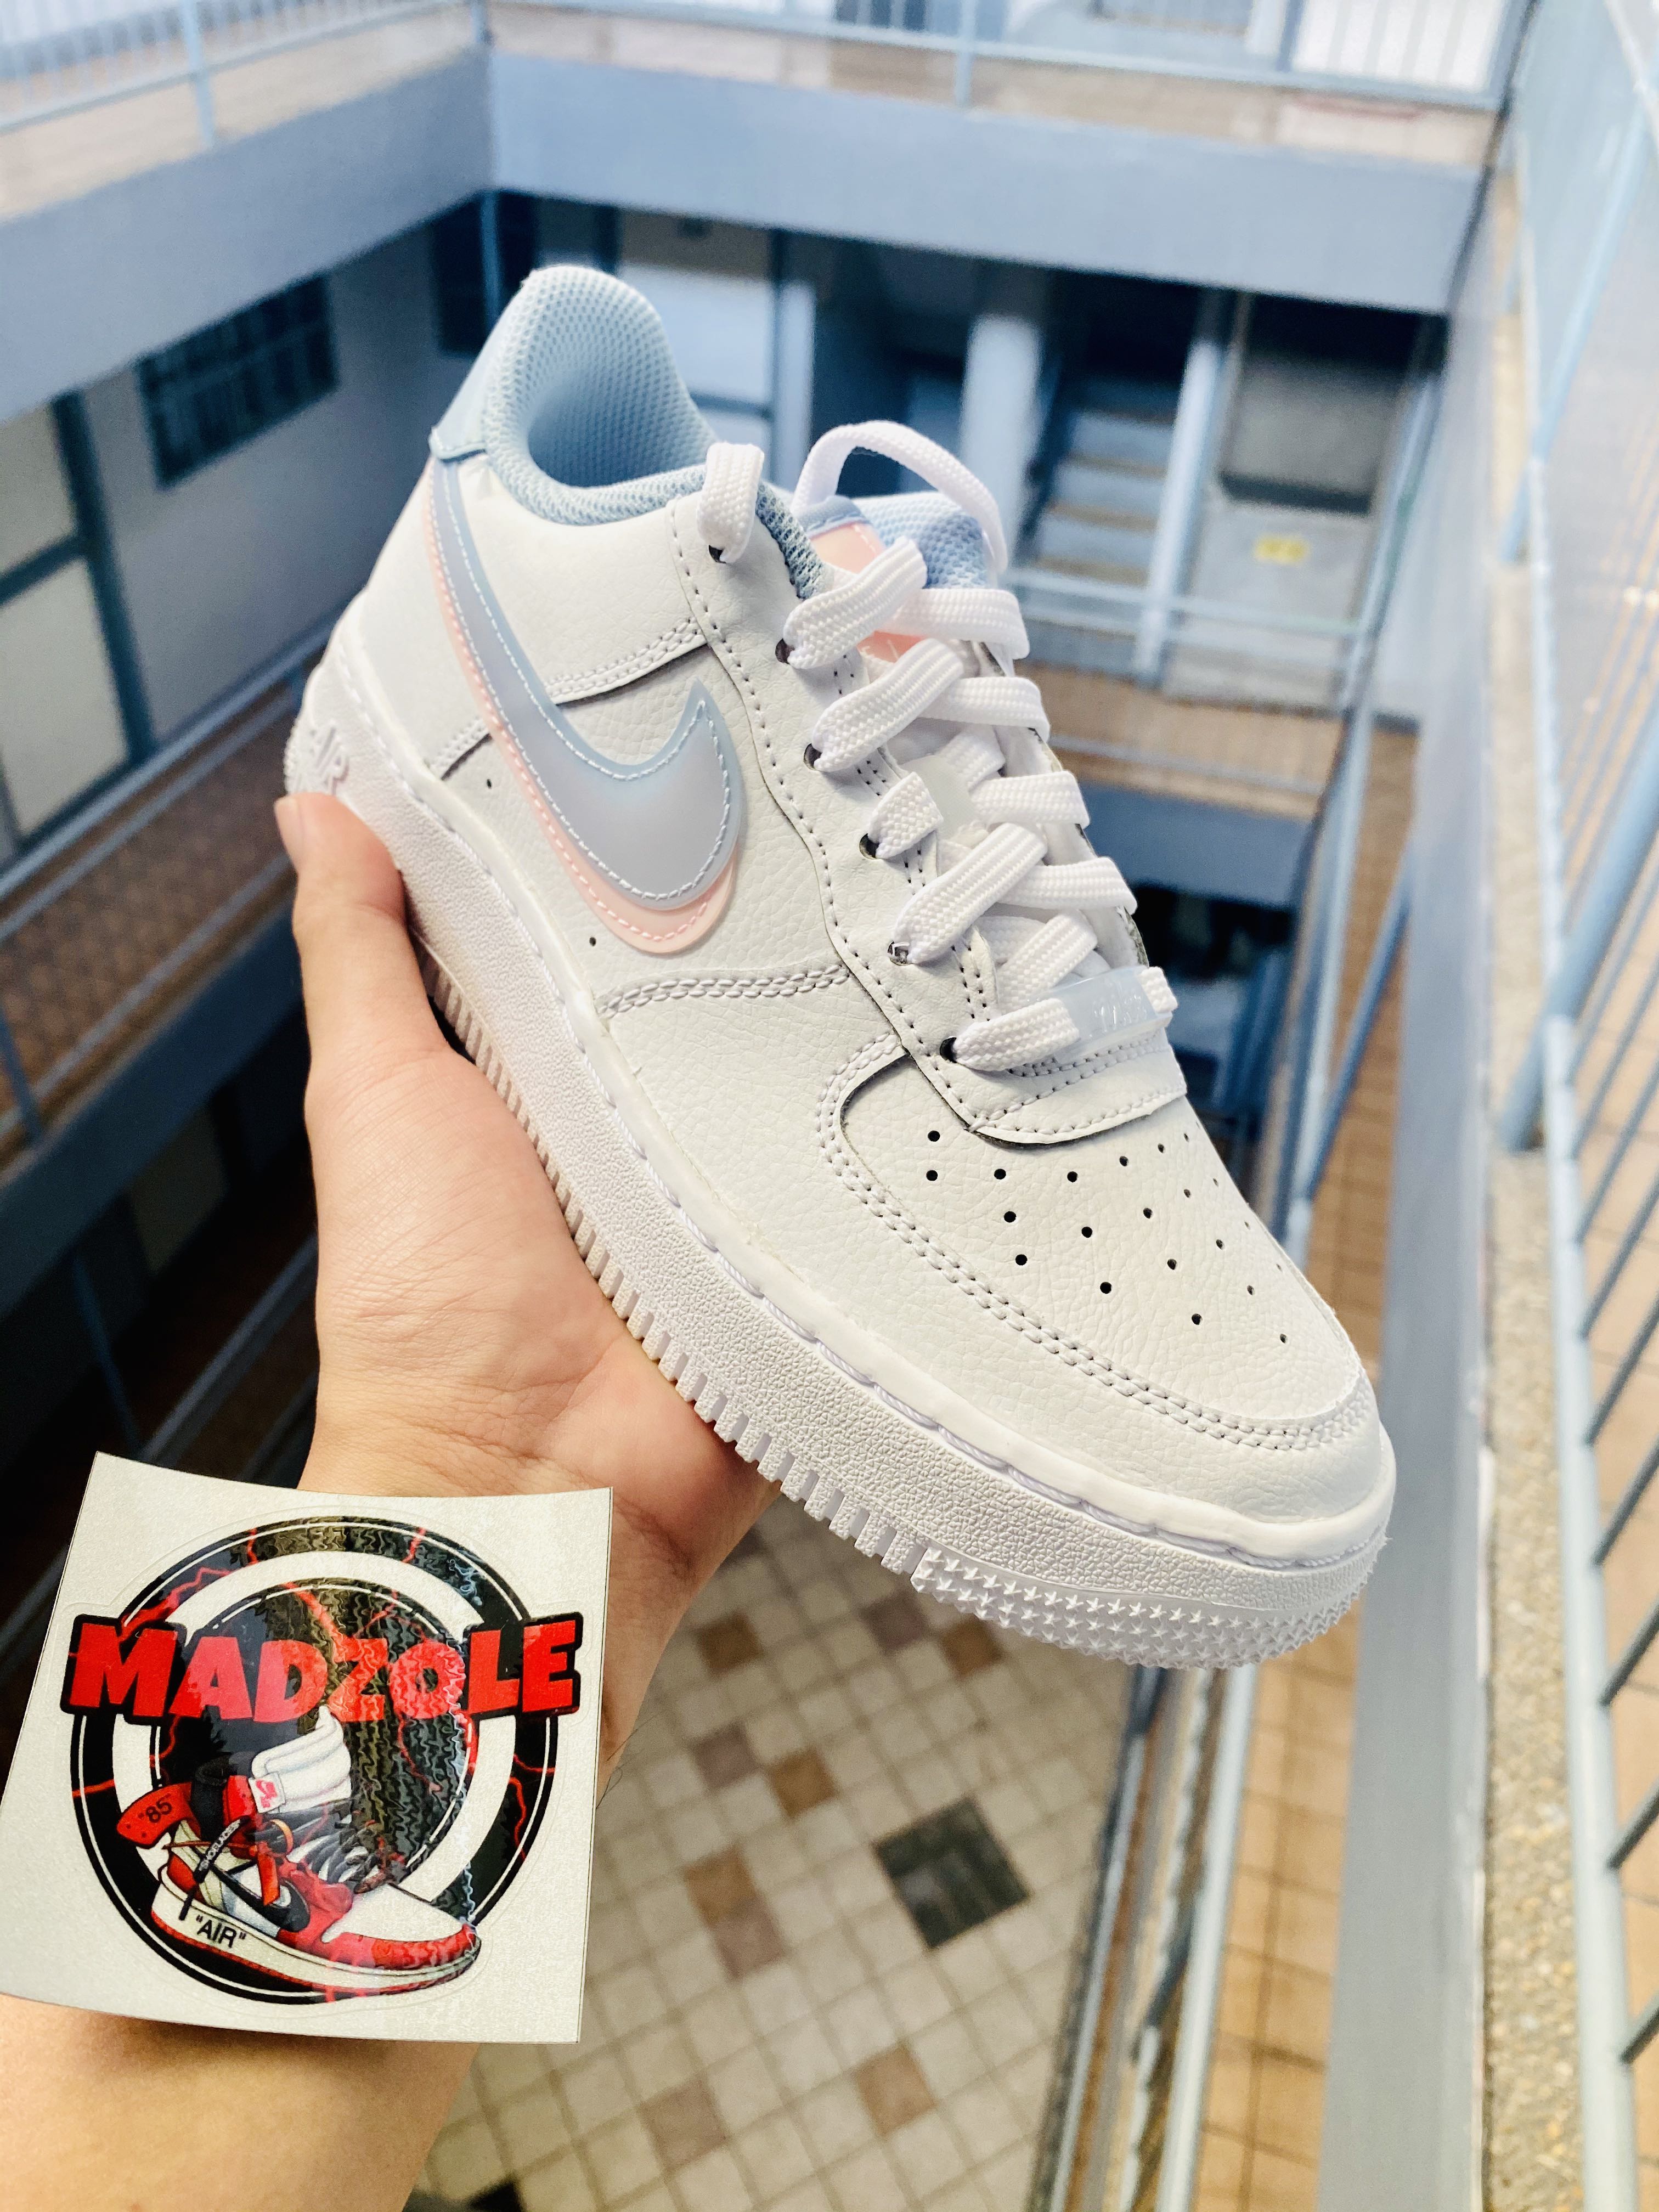 white air forces with pink and blue nike sign